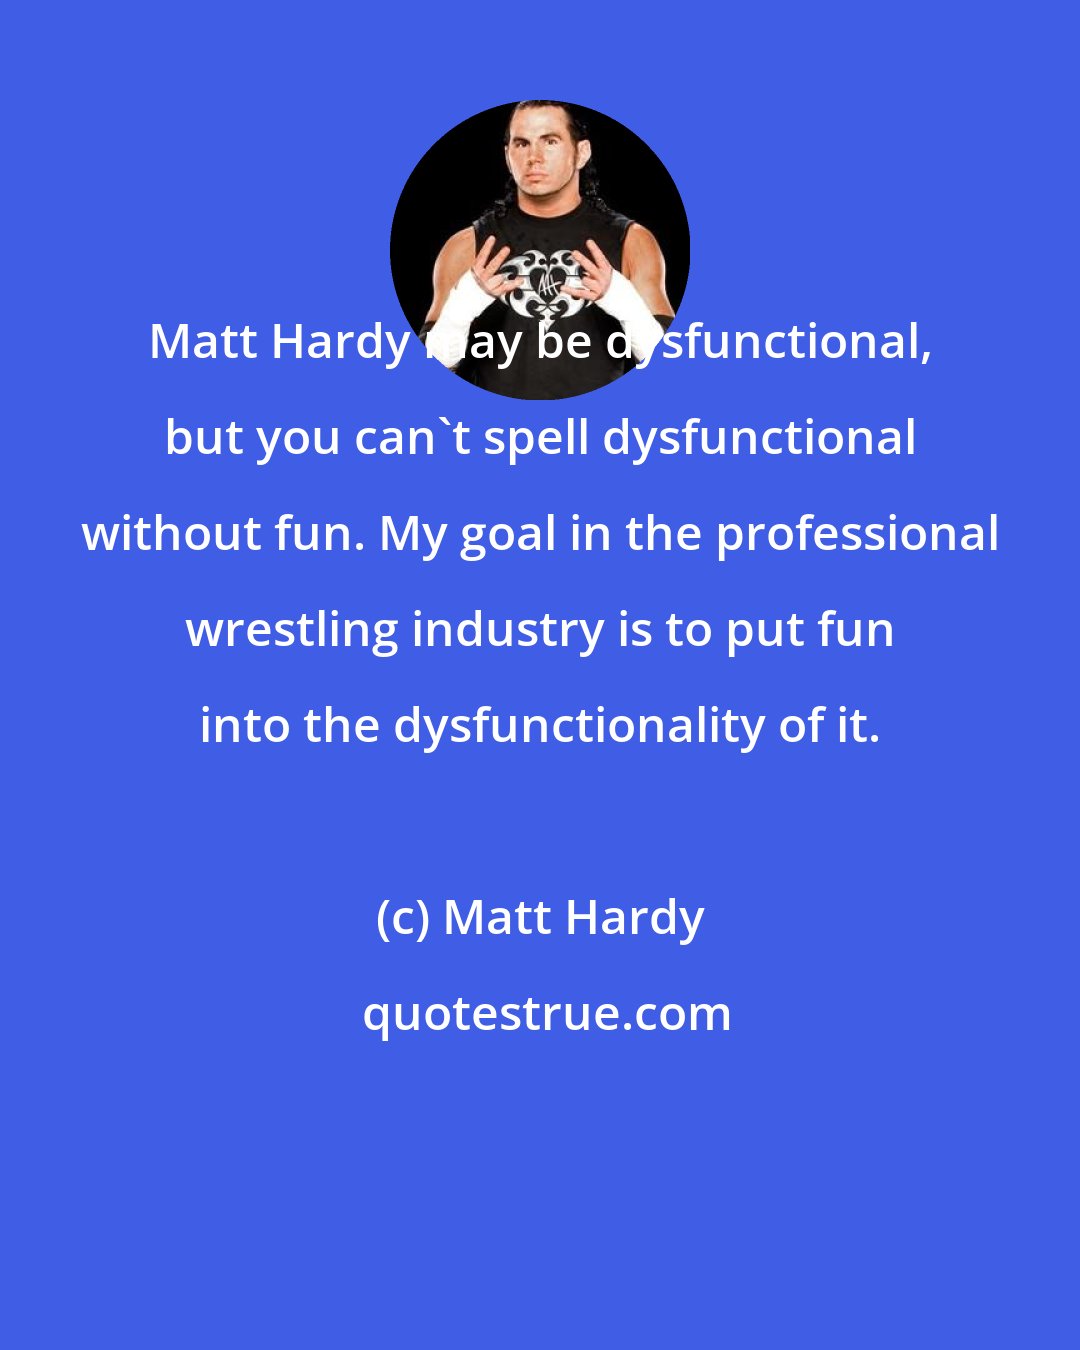 Matt Hardy: Matt Hardy may be dysfunctional, but you can't spell dysfunctional without fun. My goal in the professional wrestling industry is to put fun into the dysfunctionality of it.